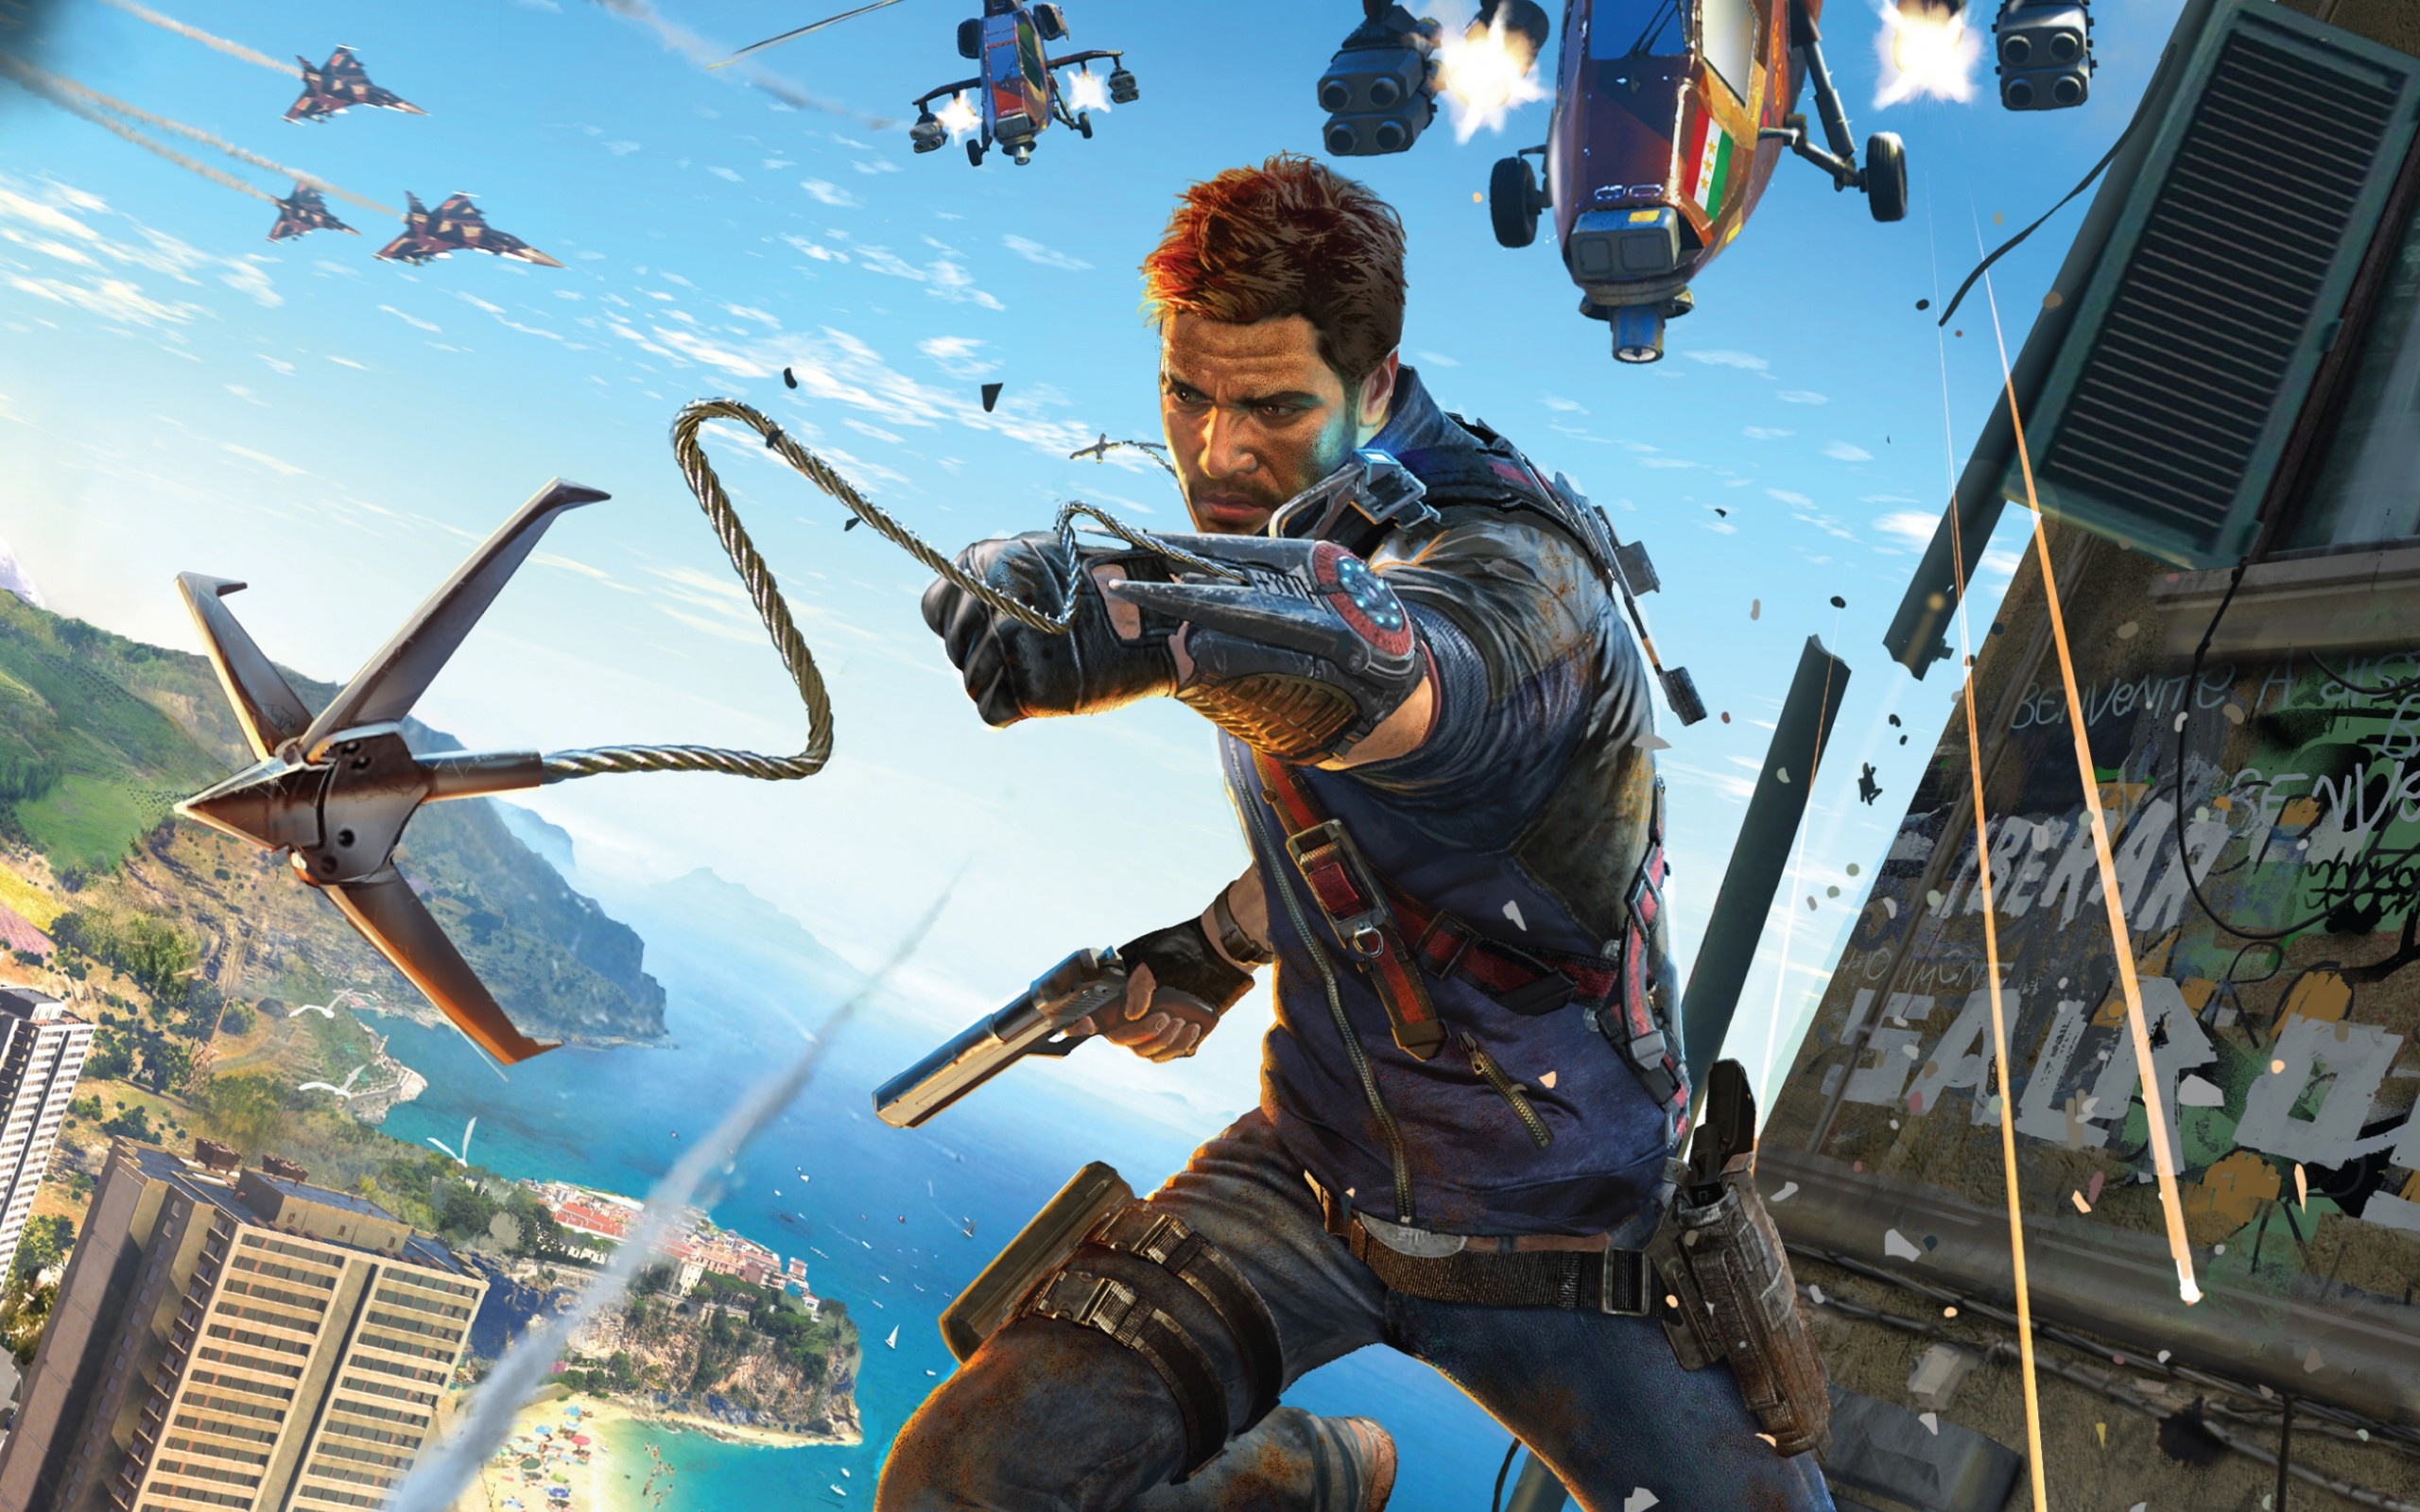 Just Cause Developer Avalanche Studios Group Lays Off 50, Announce Studios Closure